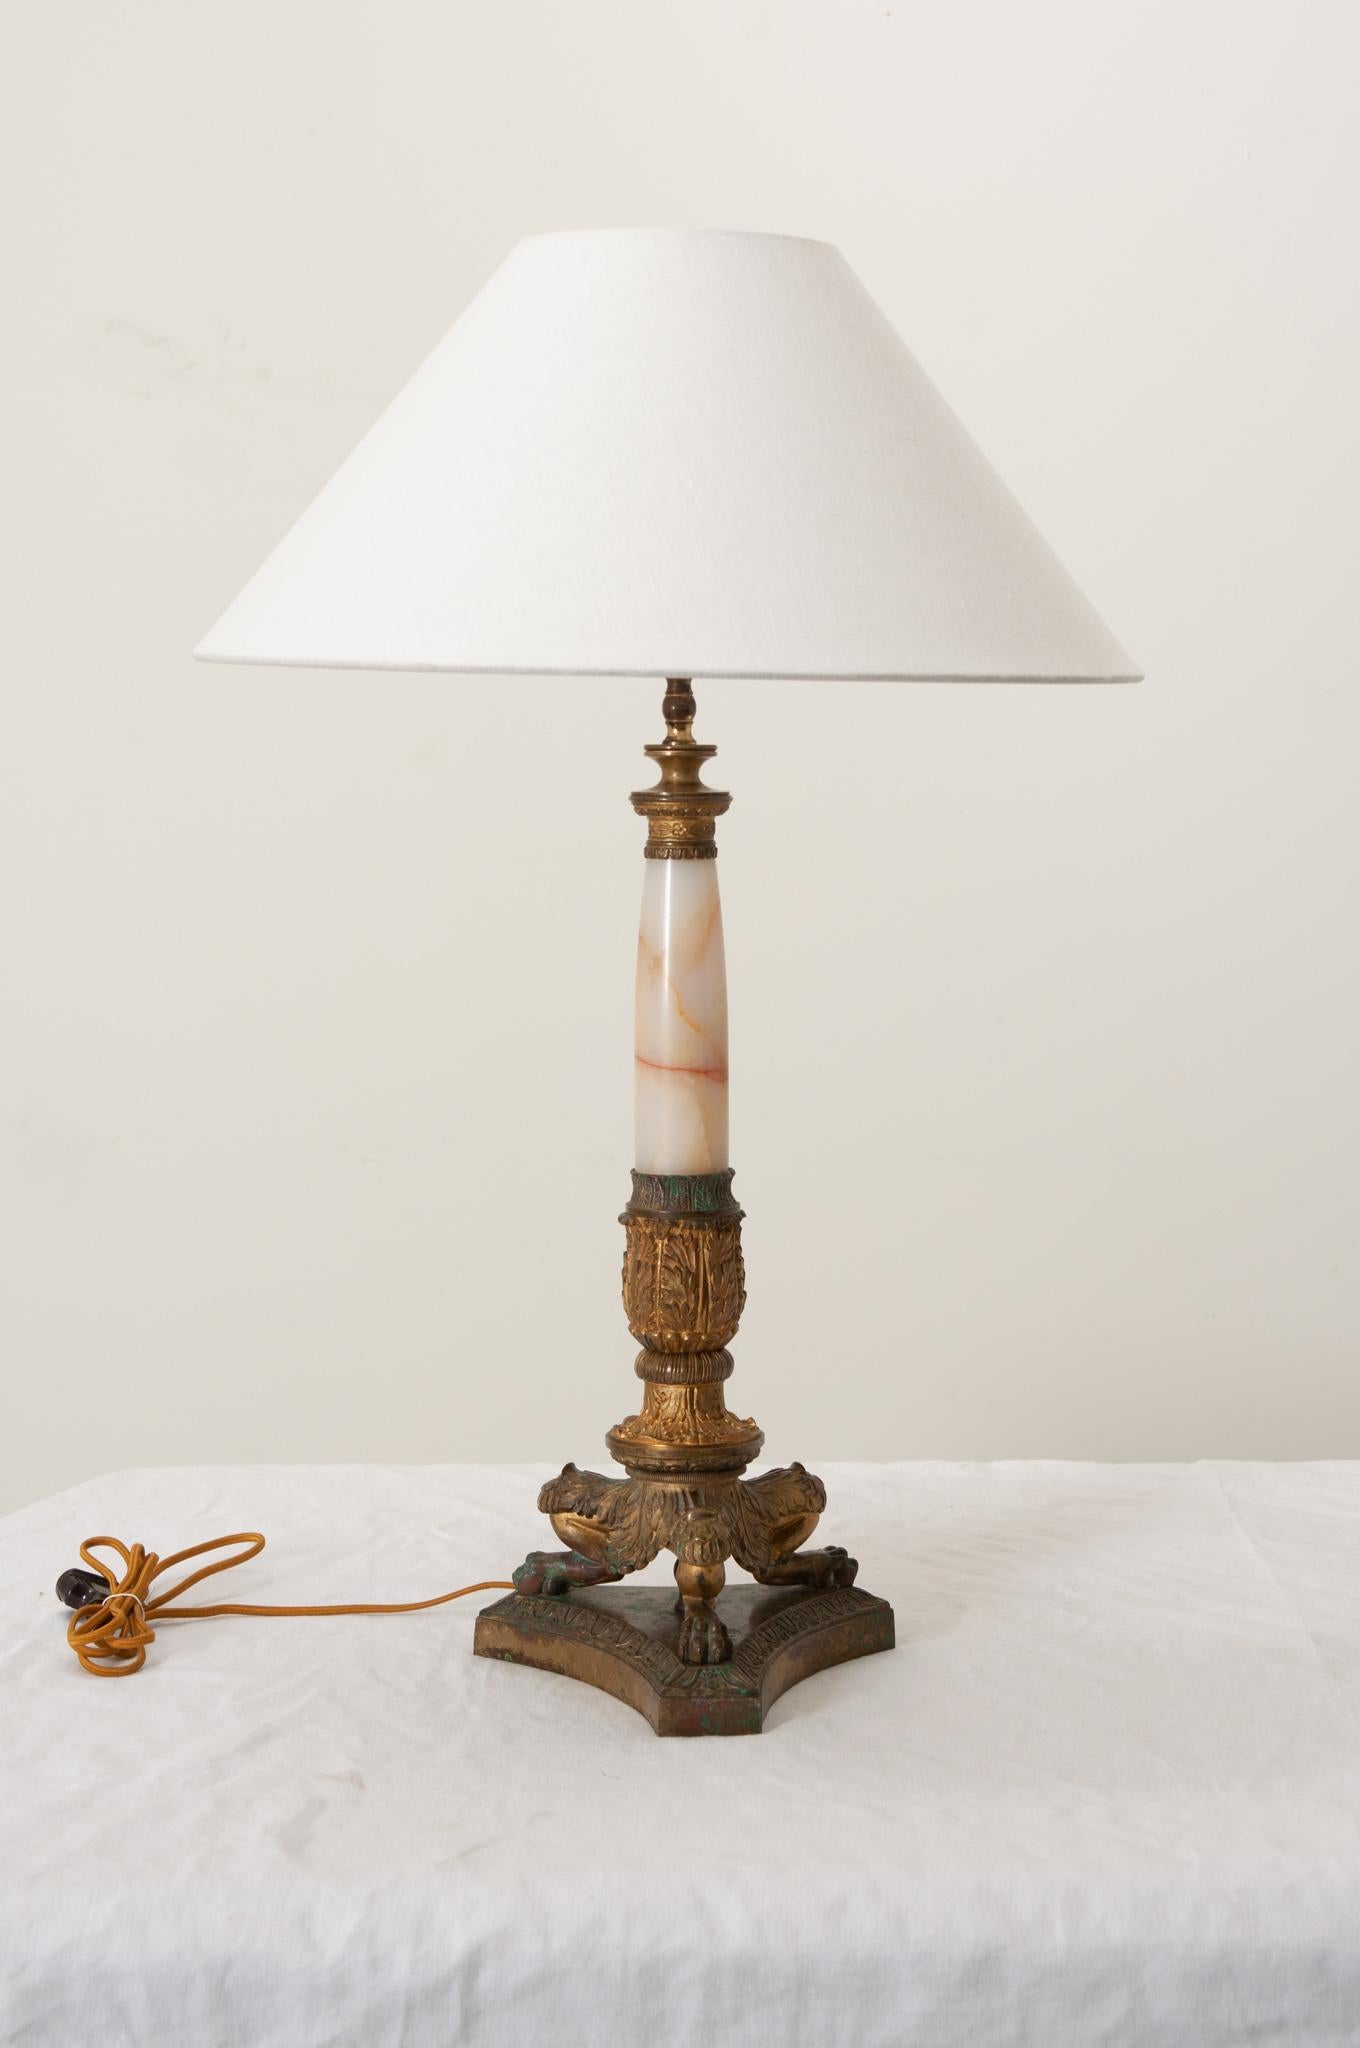 A 19th century French Empire style single light table lamp with contemporary linen shade. Elegant with neoclassical designs and featuring a tapered onyx shaft ornamented with decorative brass mounts supported by a wonderful triform lion paw footed